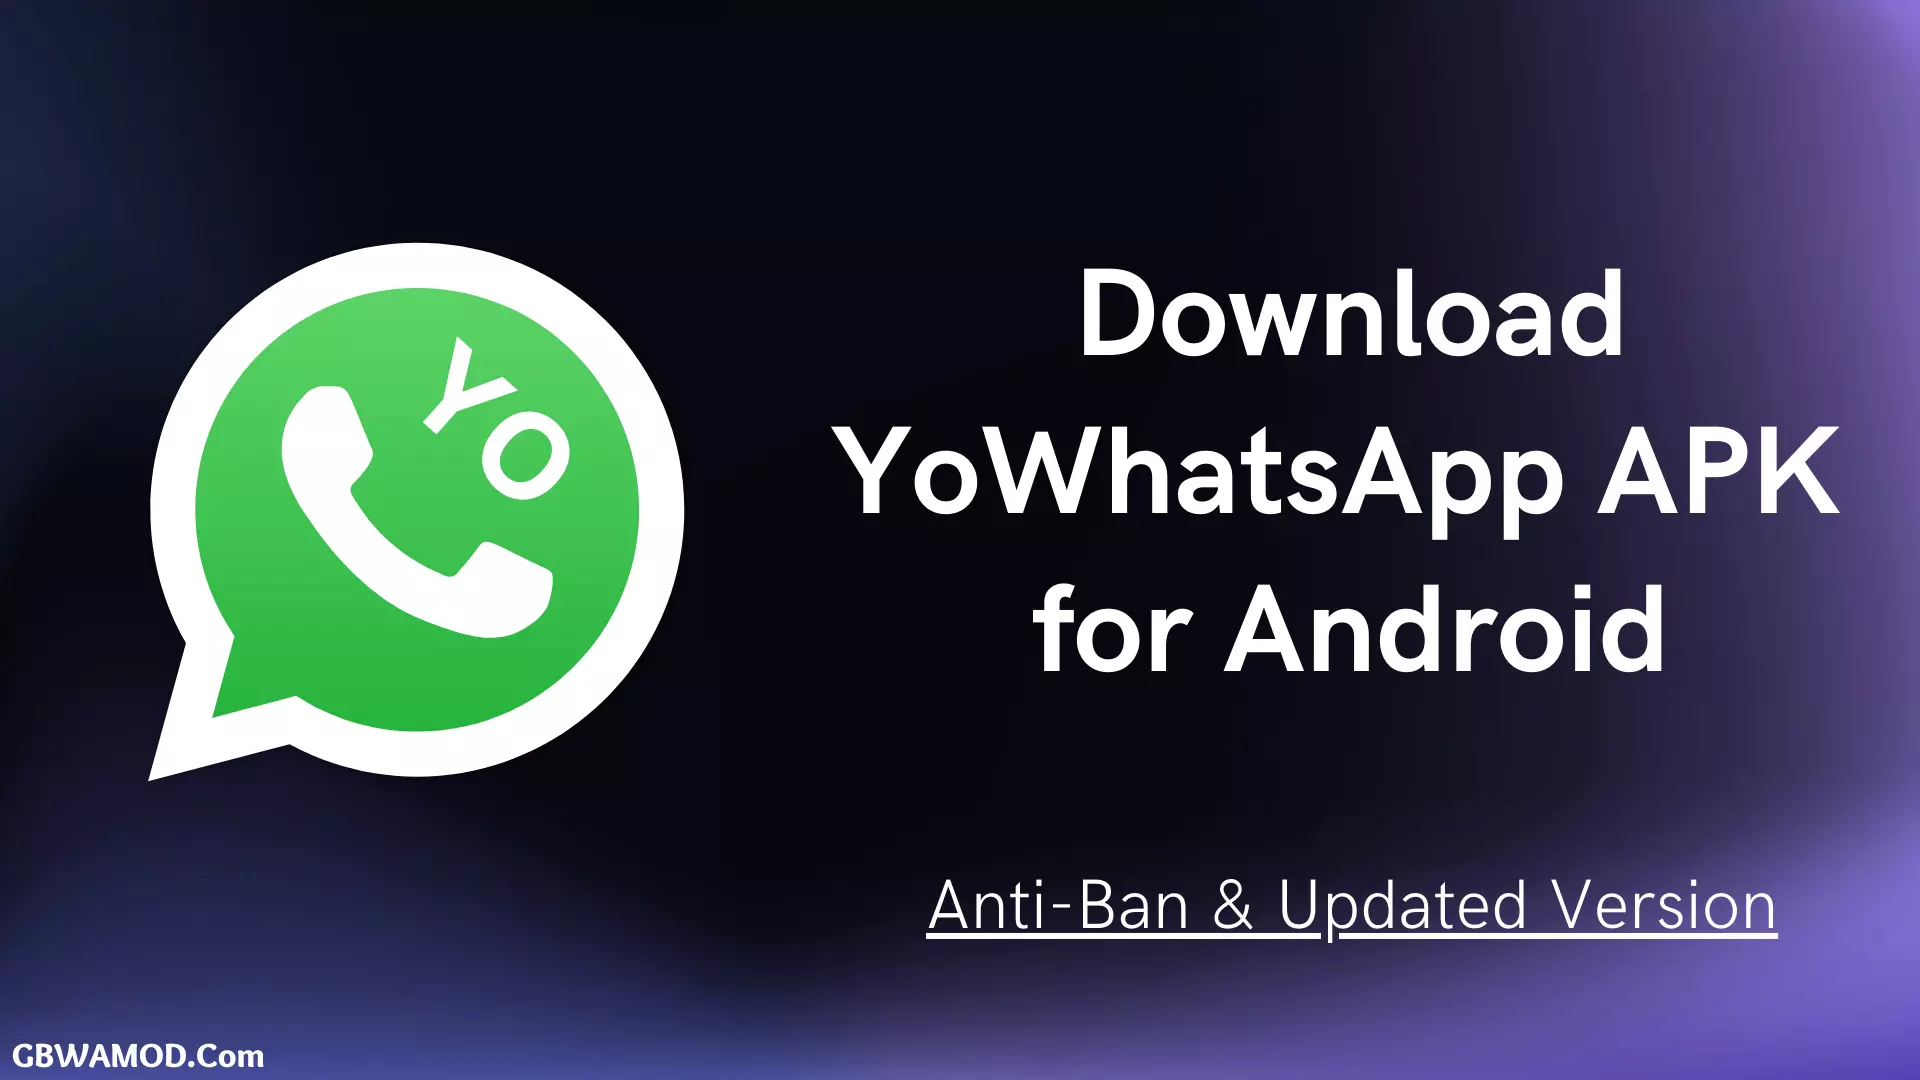 Download YoWhatsApp from here